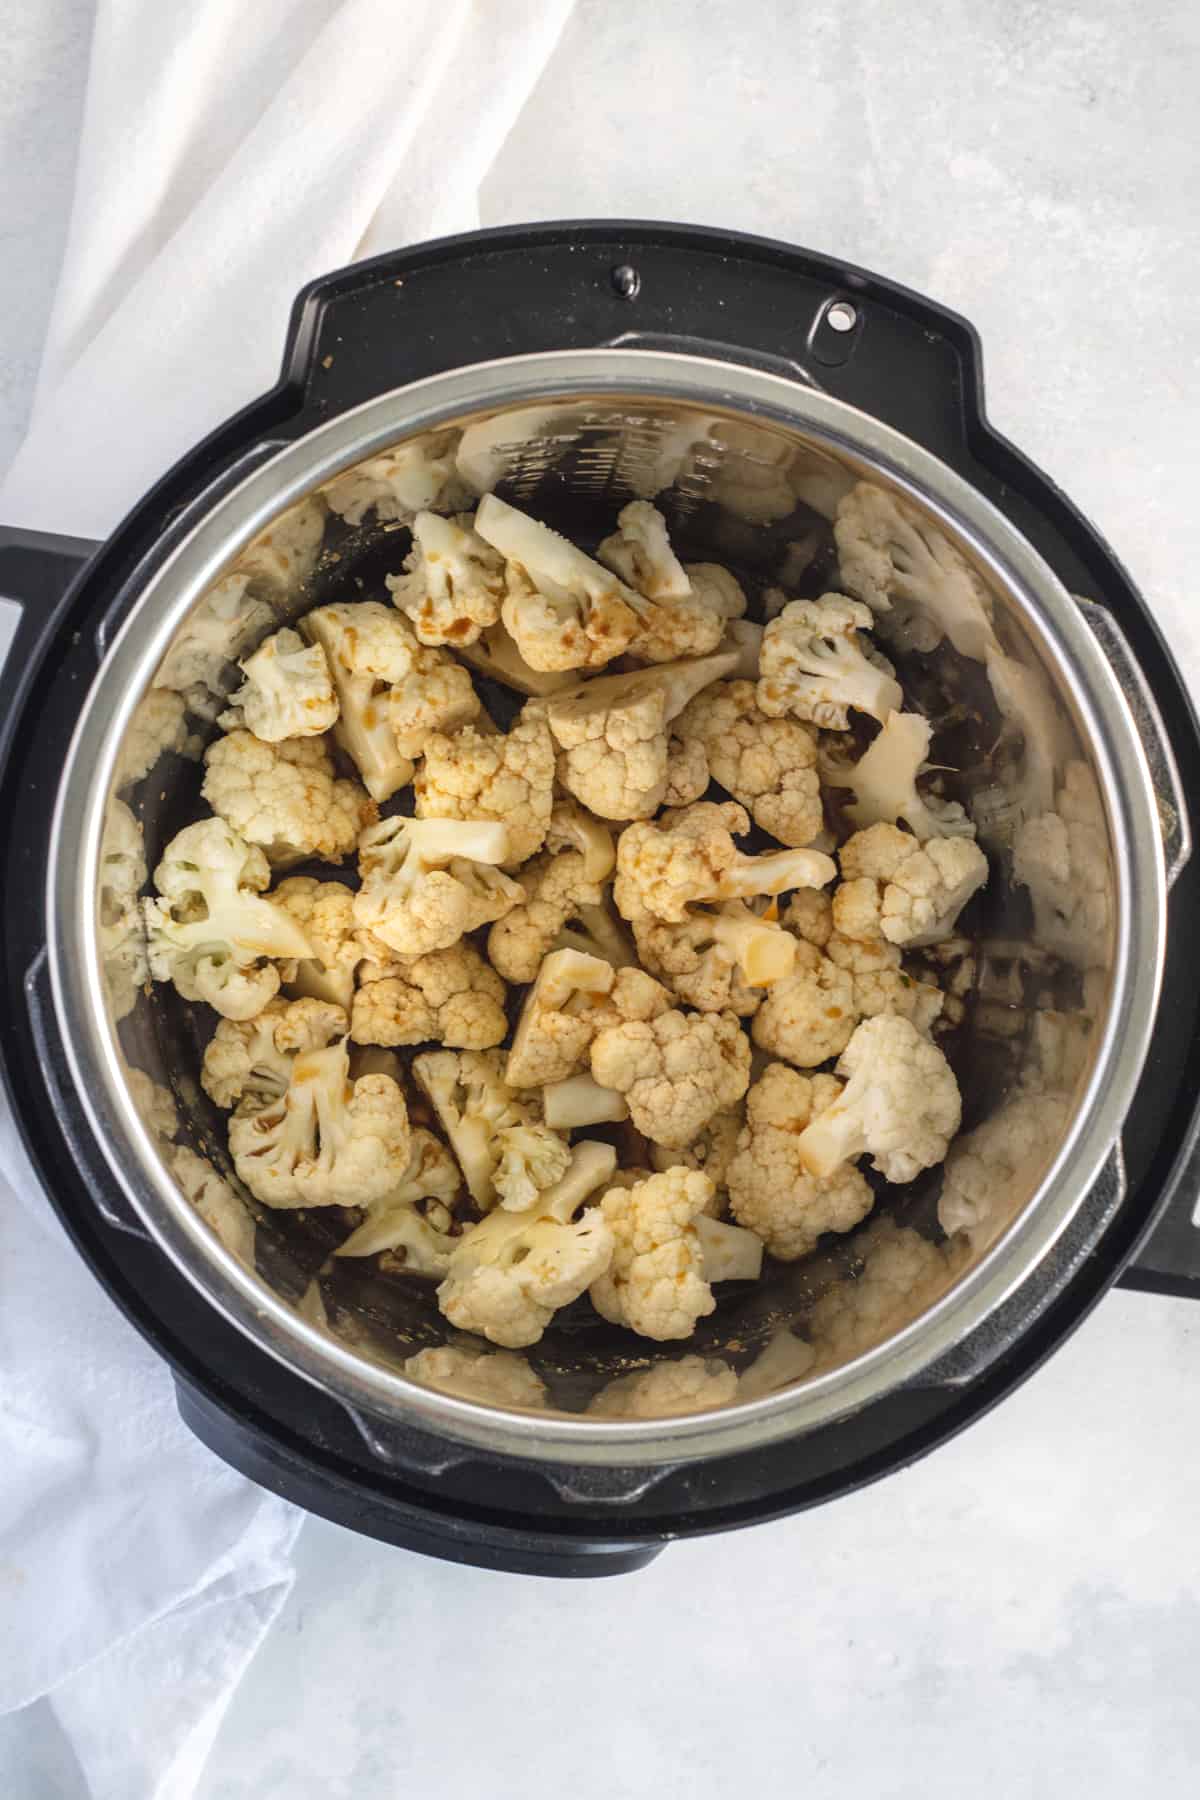 Cauliflower in the instant pot ready to be cook